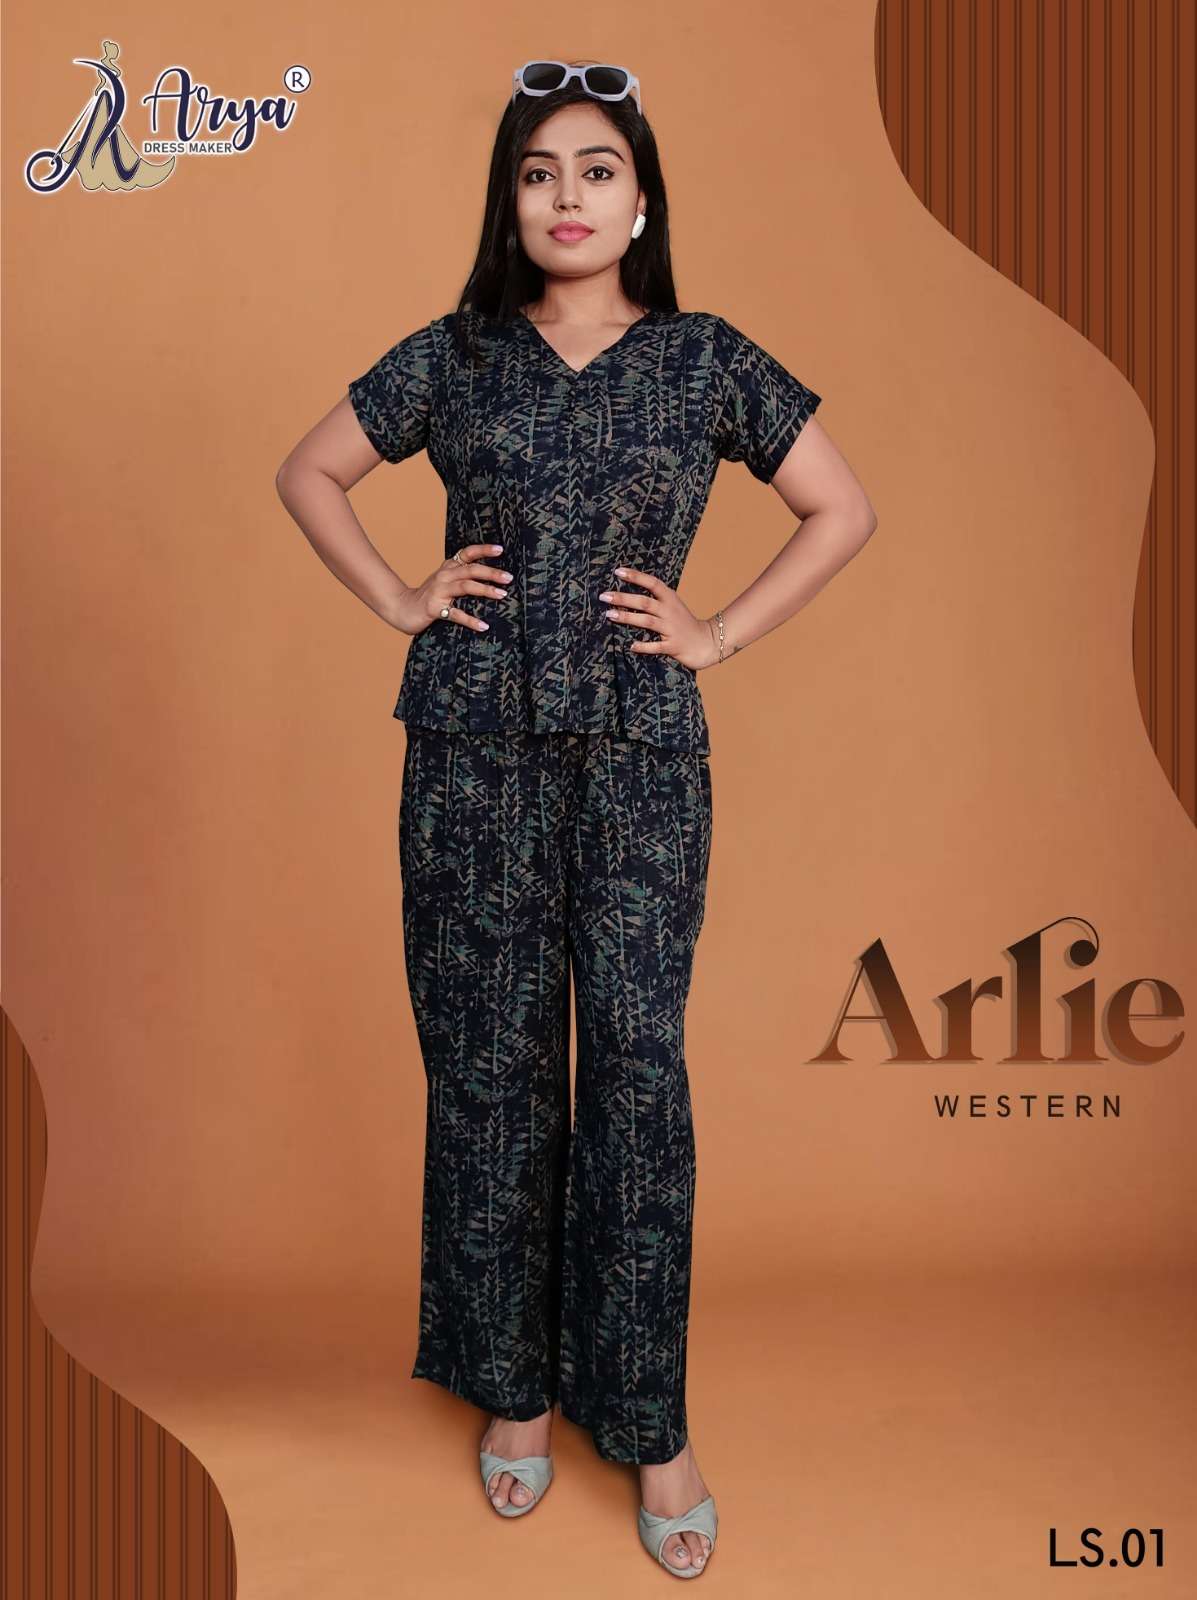 ARLIE WESTERN BY ARYA DRESS MAKER 01 TO 06 SERIES COTTON TOP AND PLAZZO 